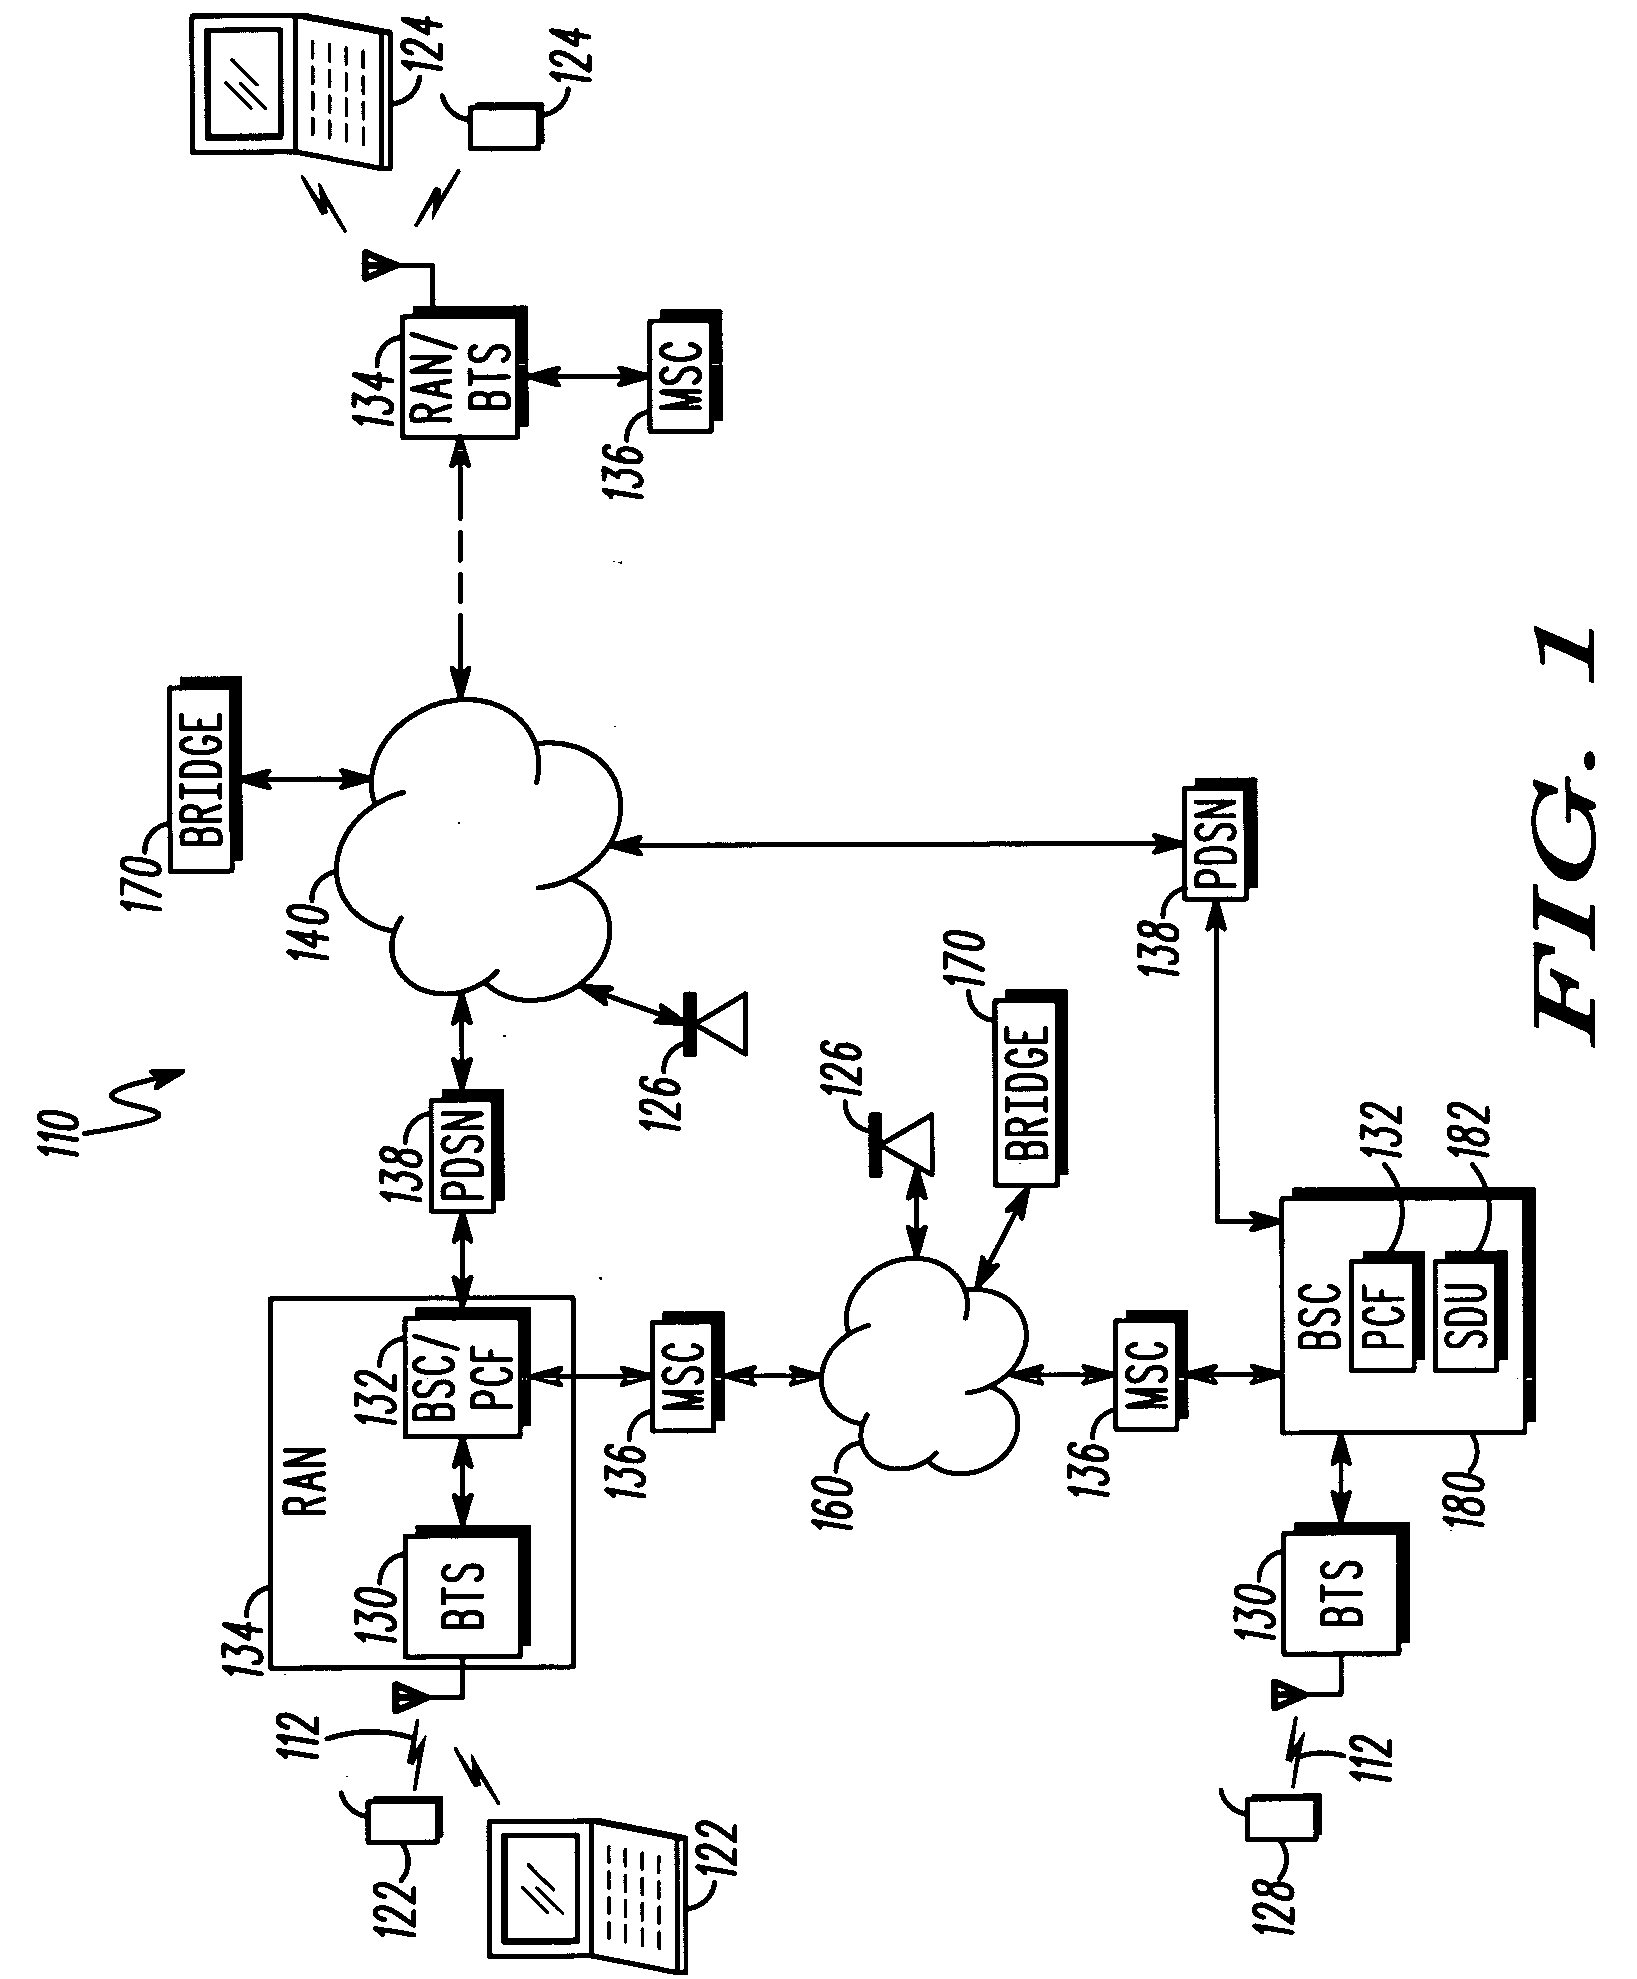 Method and system for use in reducing cost associated with lost connections in wireless communication